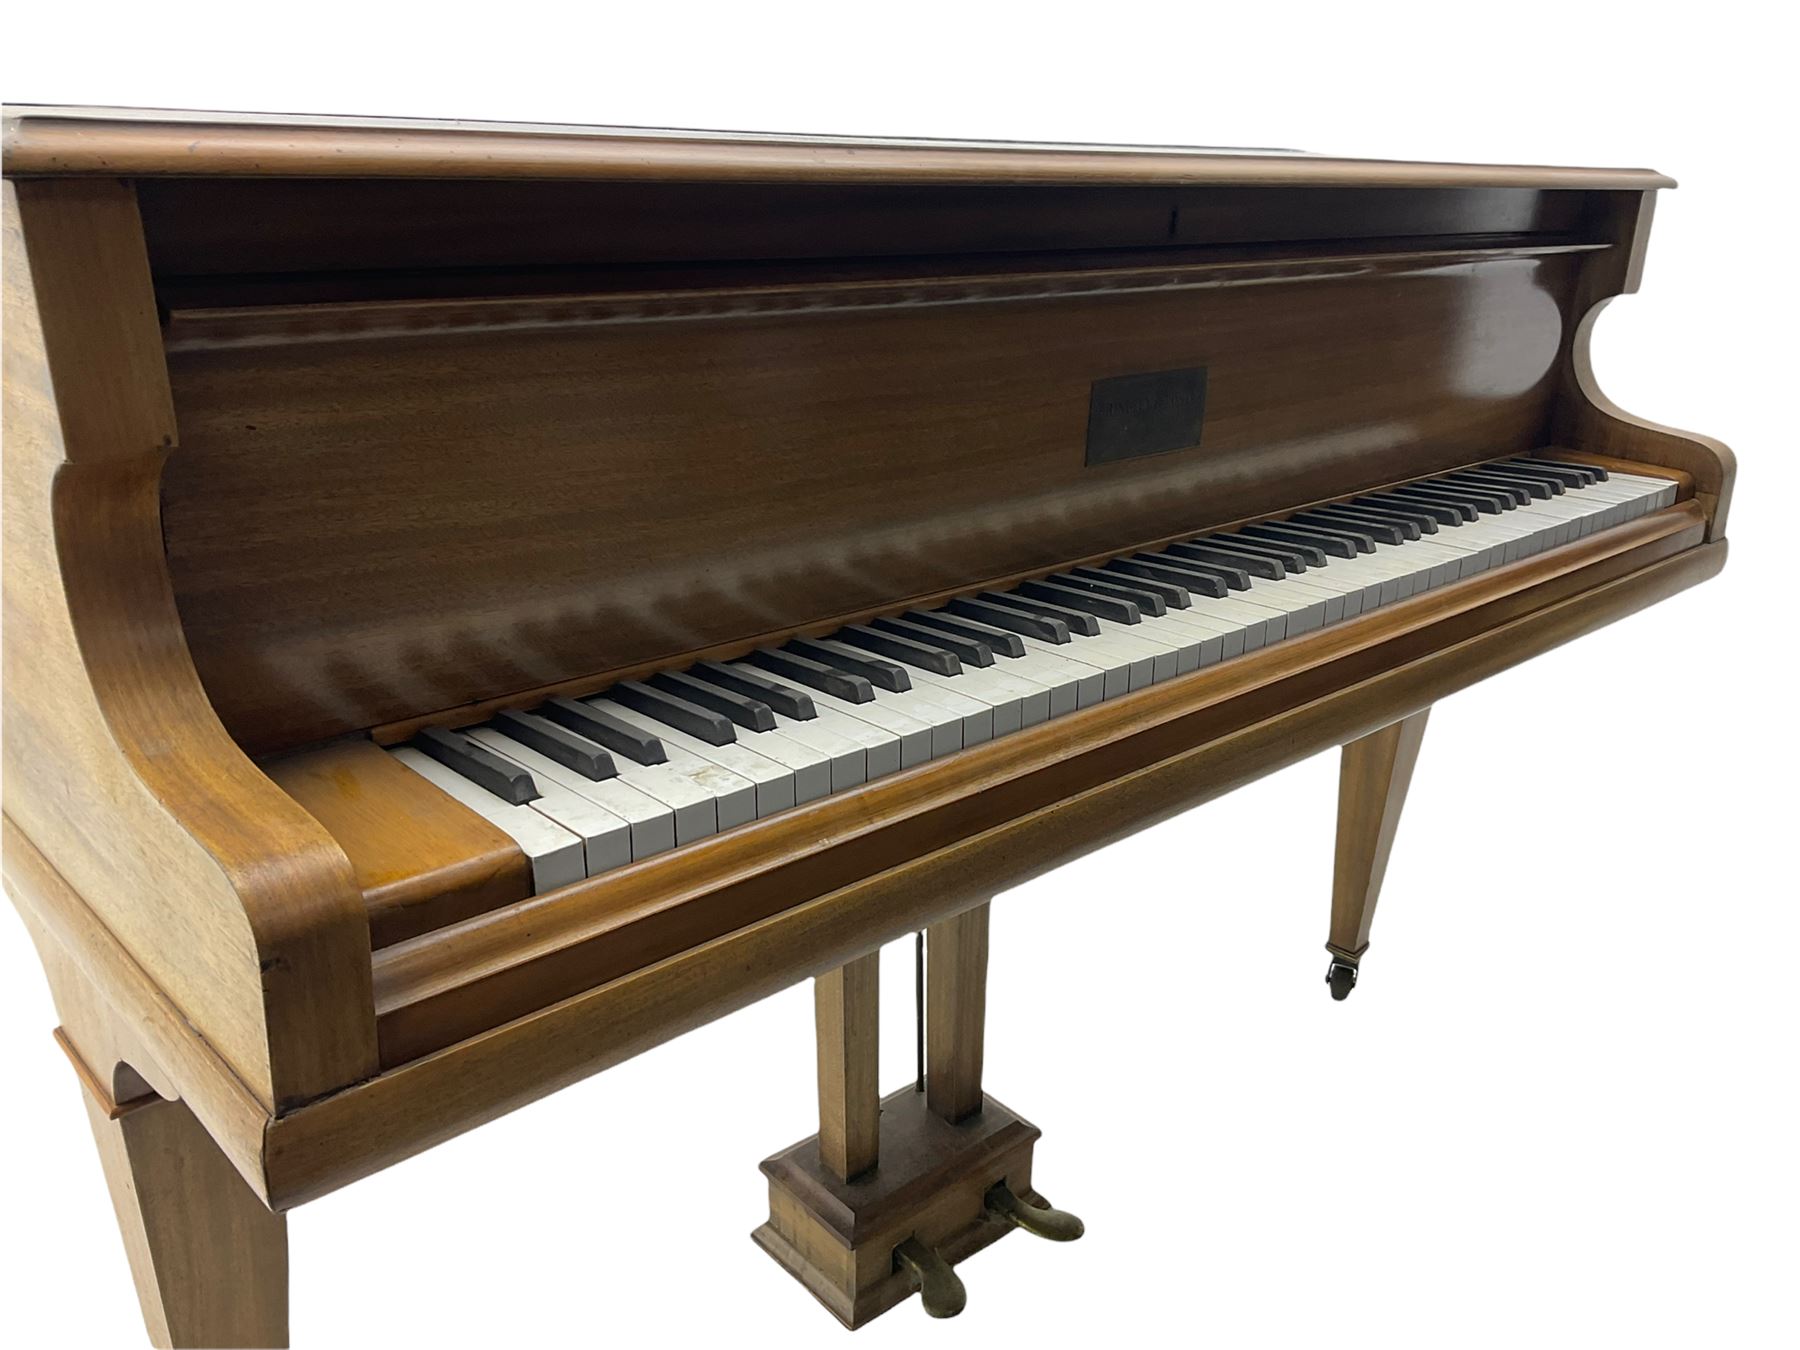 Brindley & Foster mahogany cased baby grand piano - Image 5 of 10